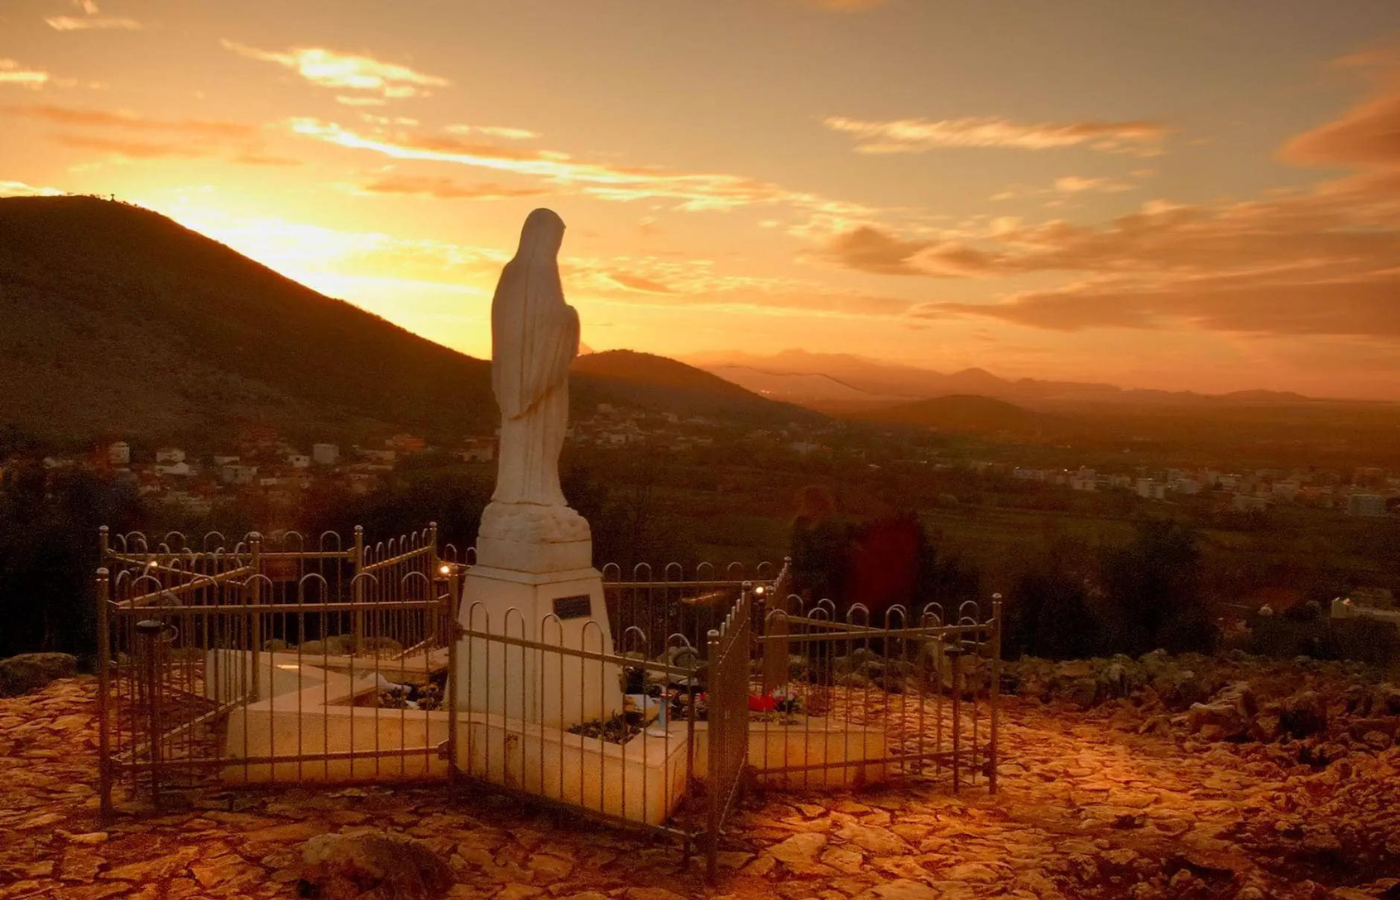 Medjugorje – Our Lady asks for an Immediate Rosary Novena for Peace